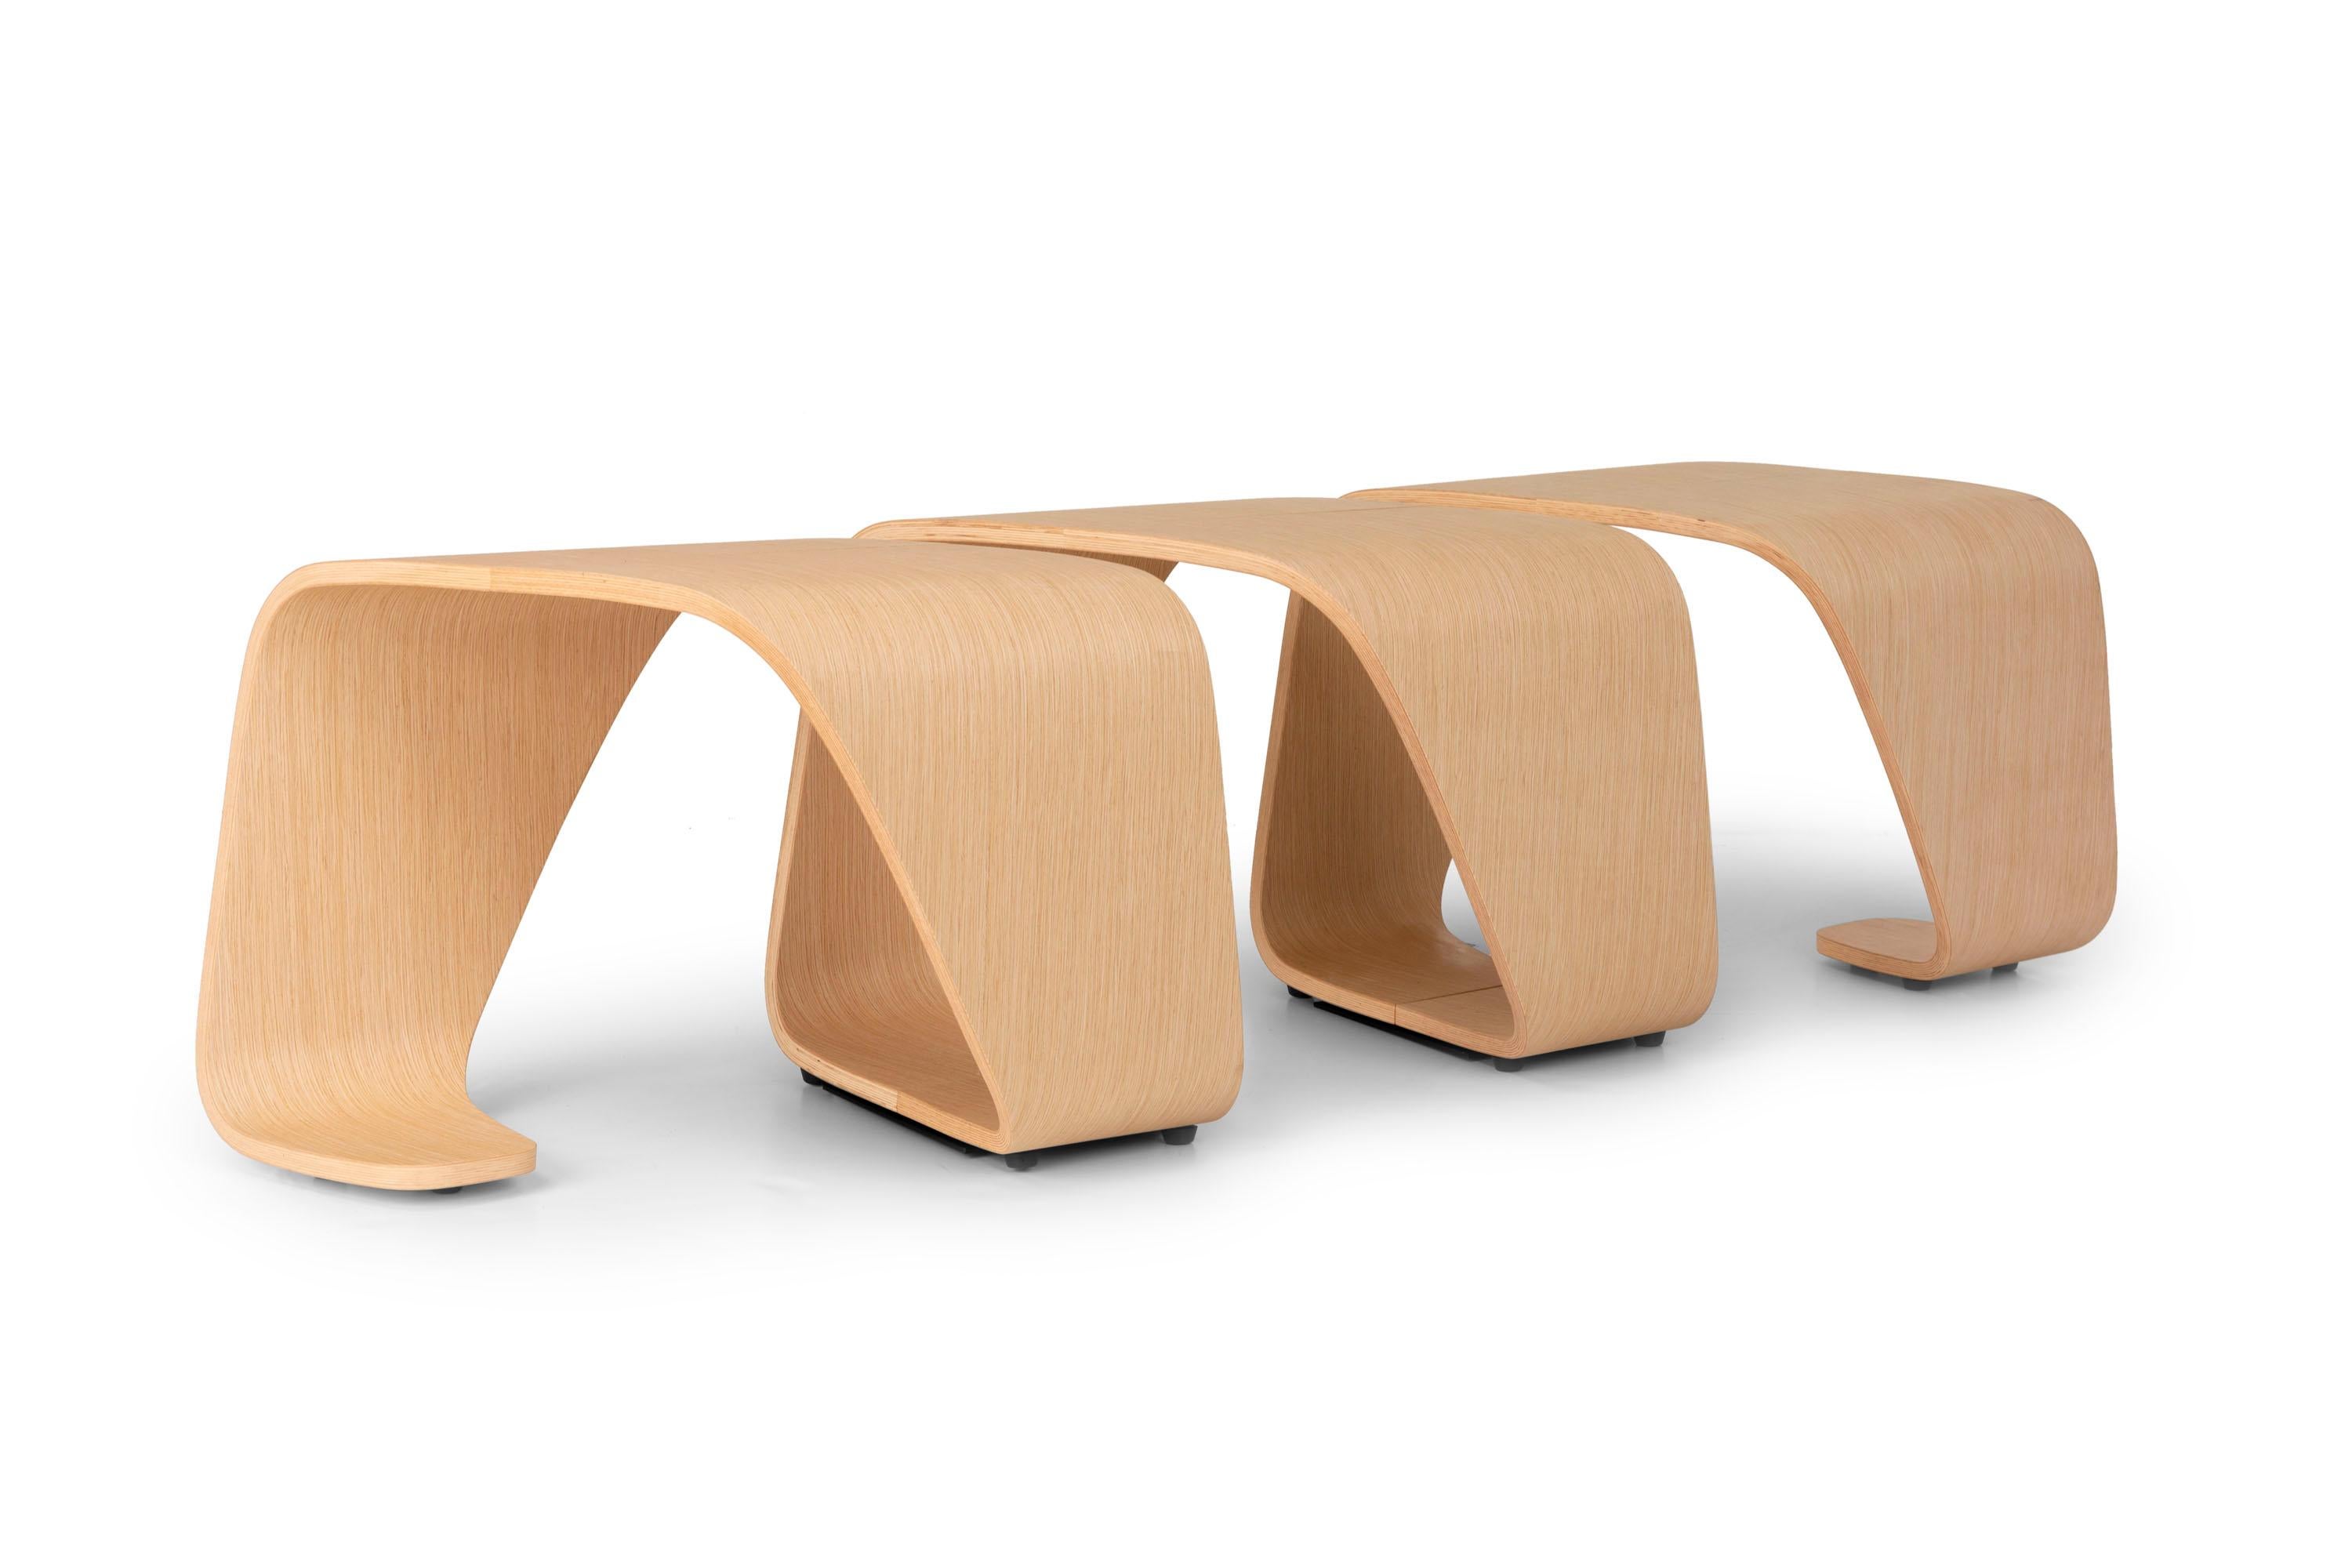 Inspired by the dynamic forms of biogenetics, the DNA modular bench consists of a single element of curved wood plywood, assembled specularly. 
The result is an appealing piece of furniture with a particular helix shape, each step of which